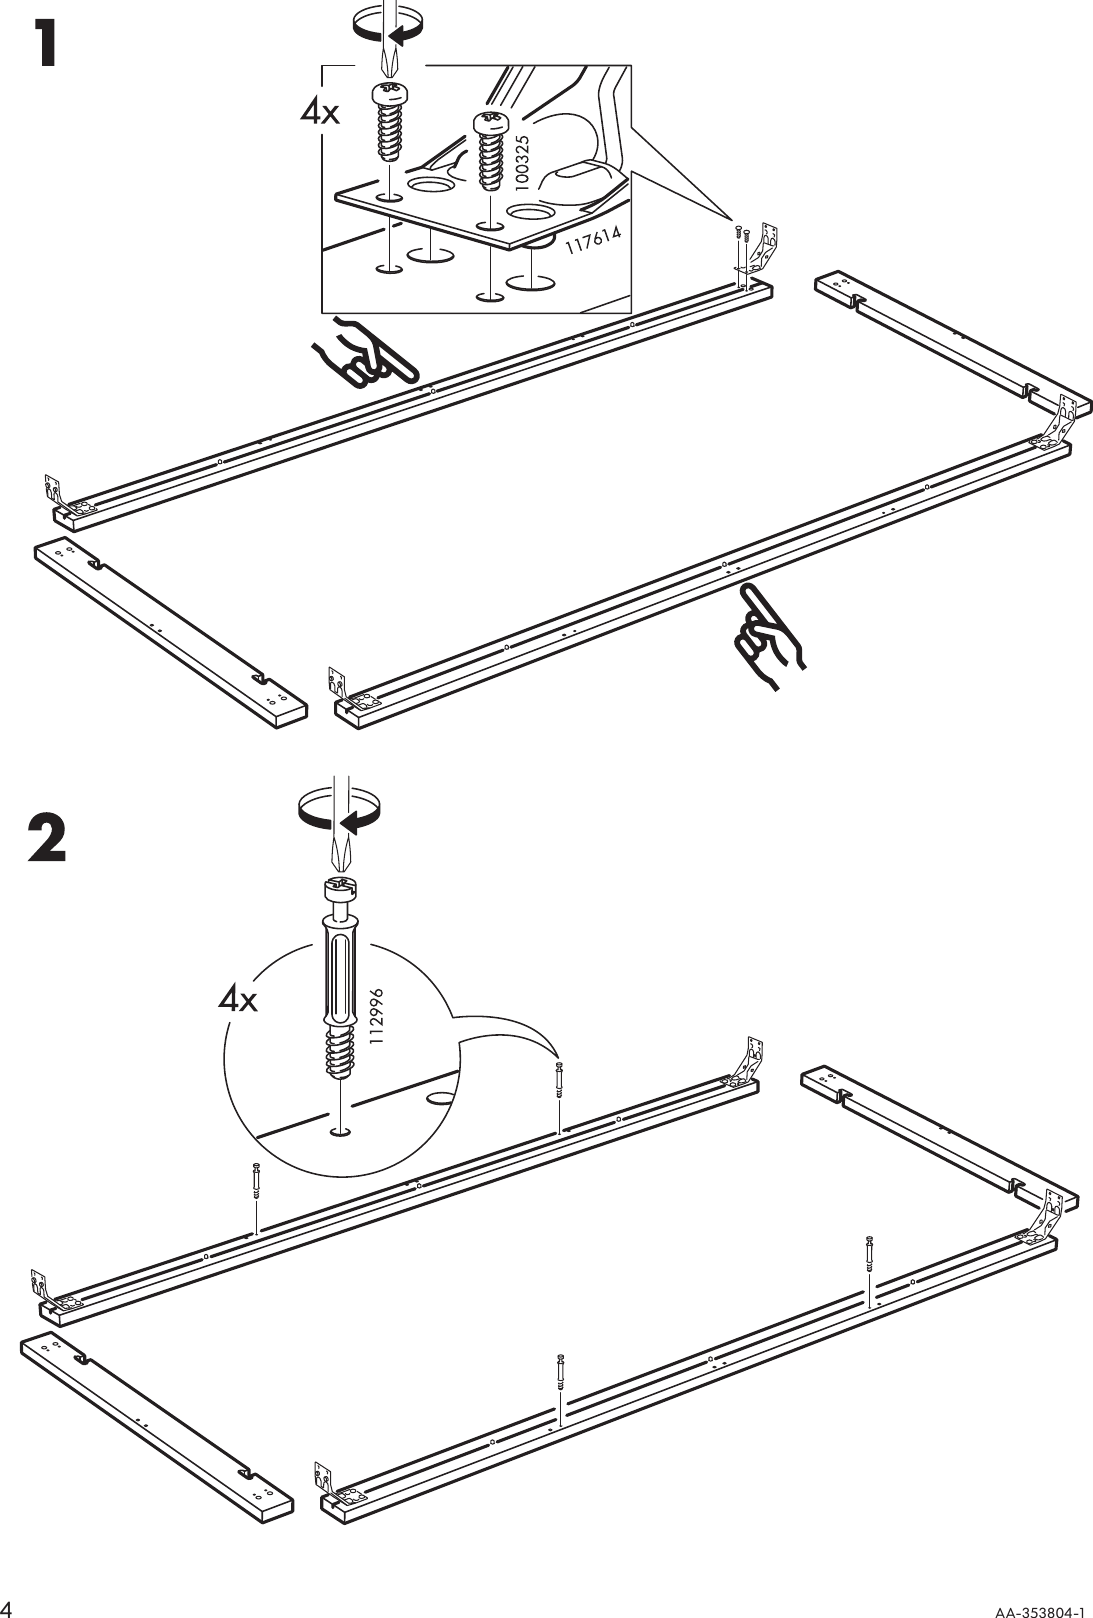 Page 4 of 12 - Ikea Ikea-Bjursta-Extendable-Dining-Table-94-114-133X43-Assembly-Instruction